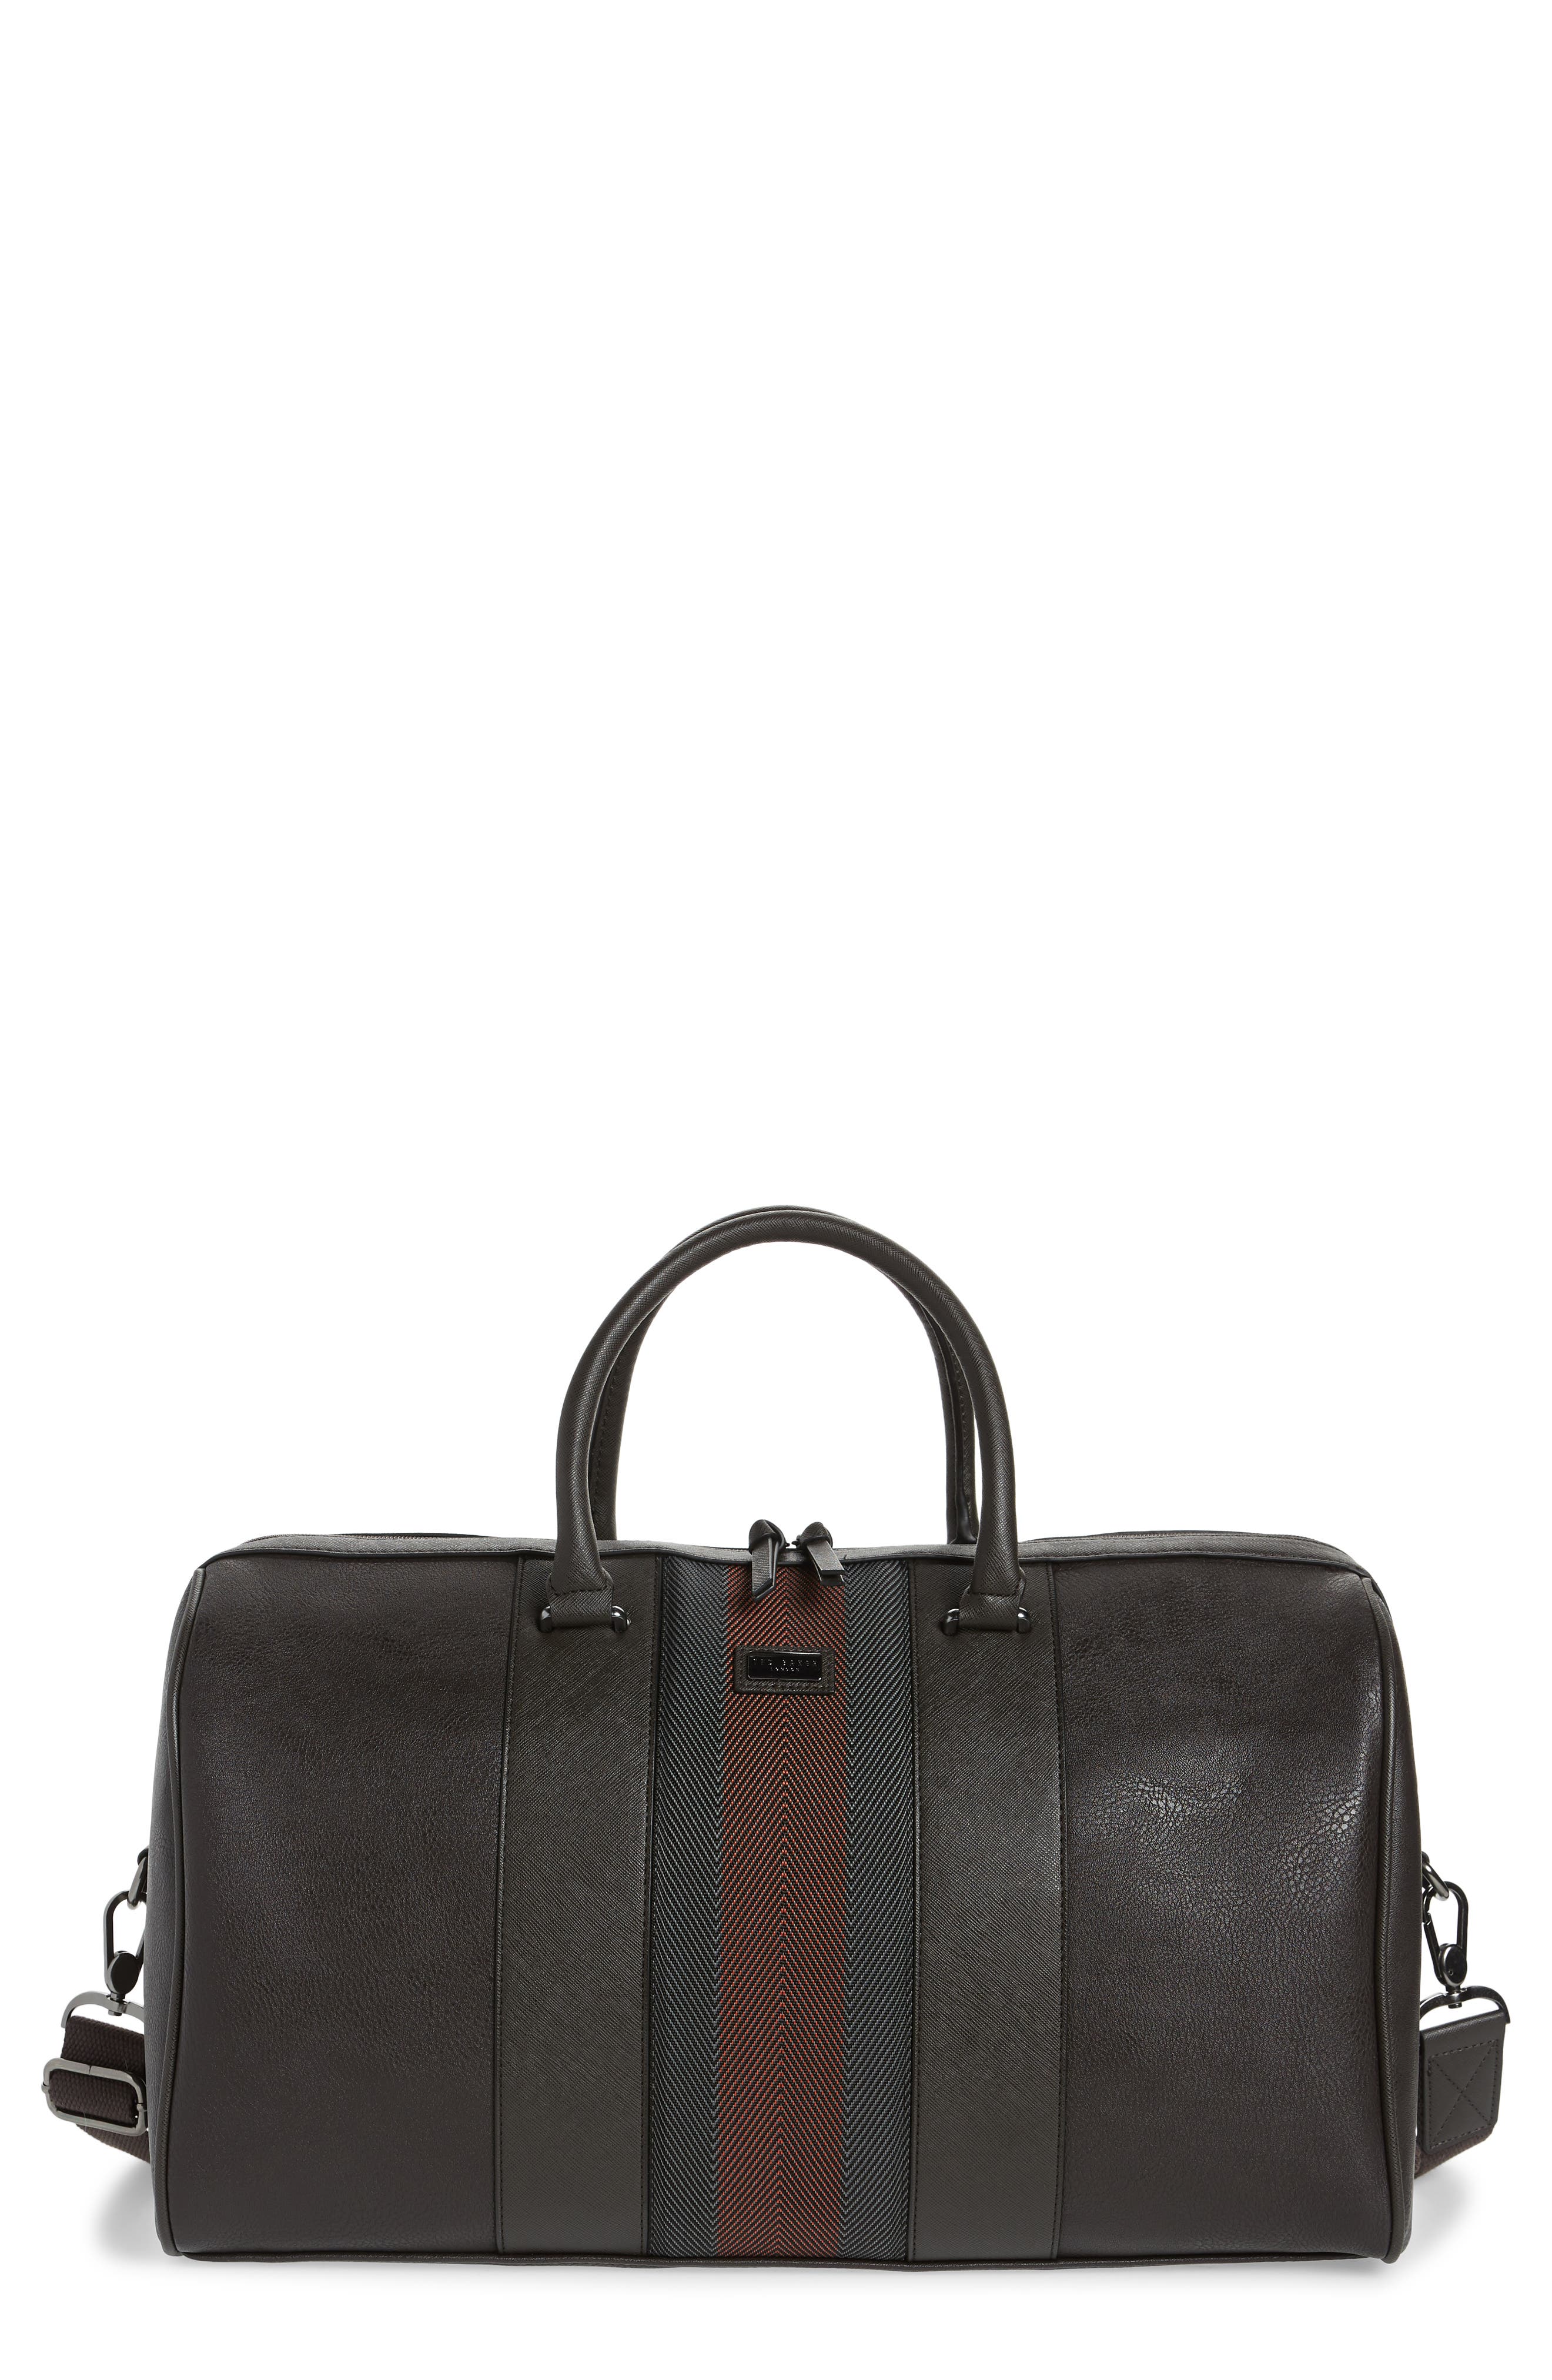 Ted Baker Satin Eping for Men Mens Bags Luggage and suitcases 